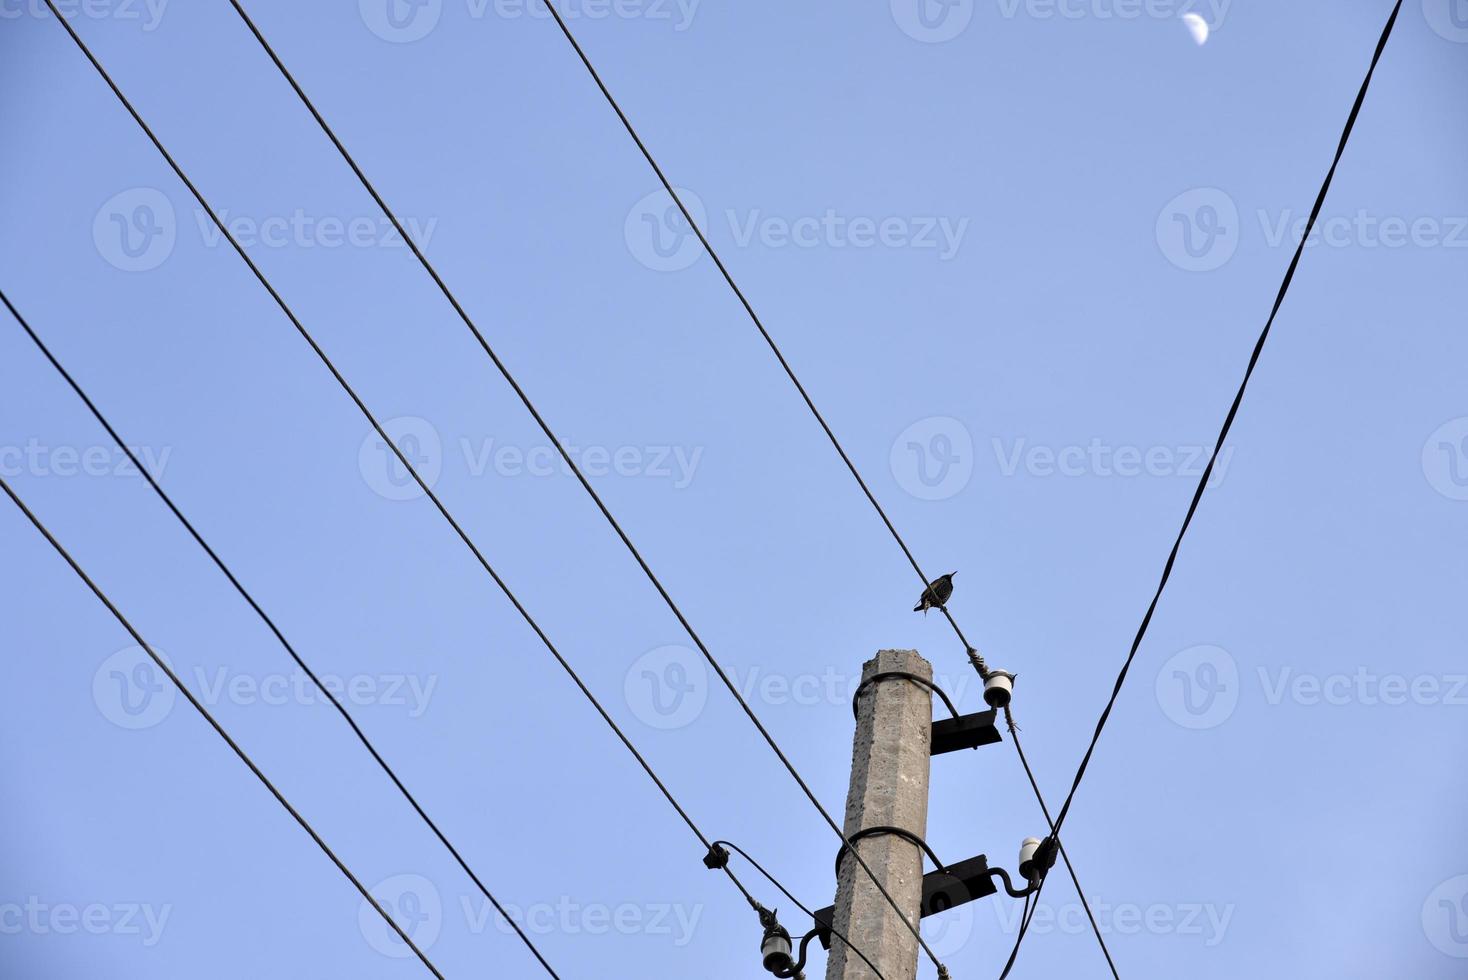 A starling bird on a power line photo